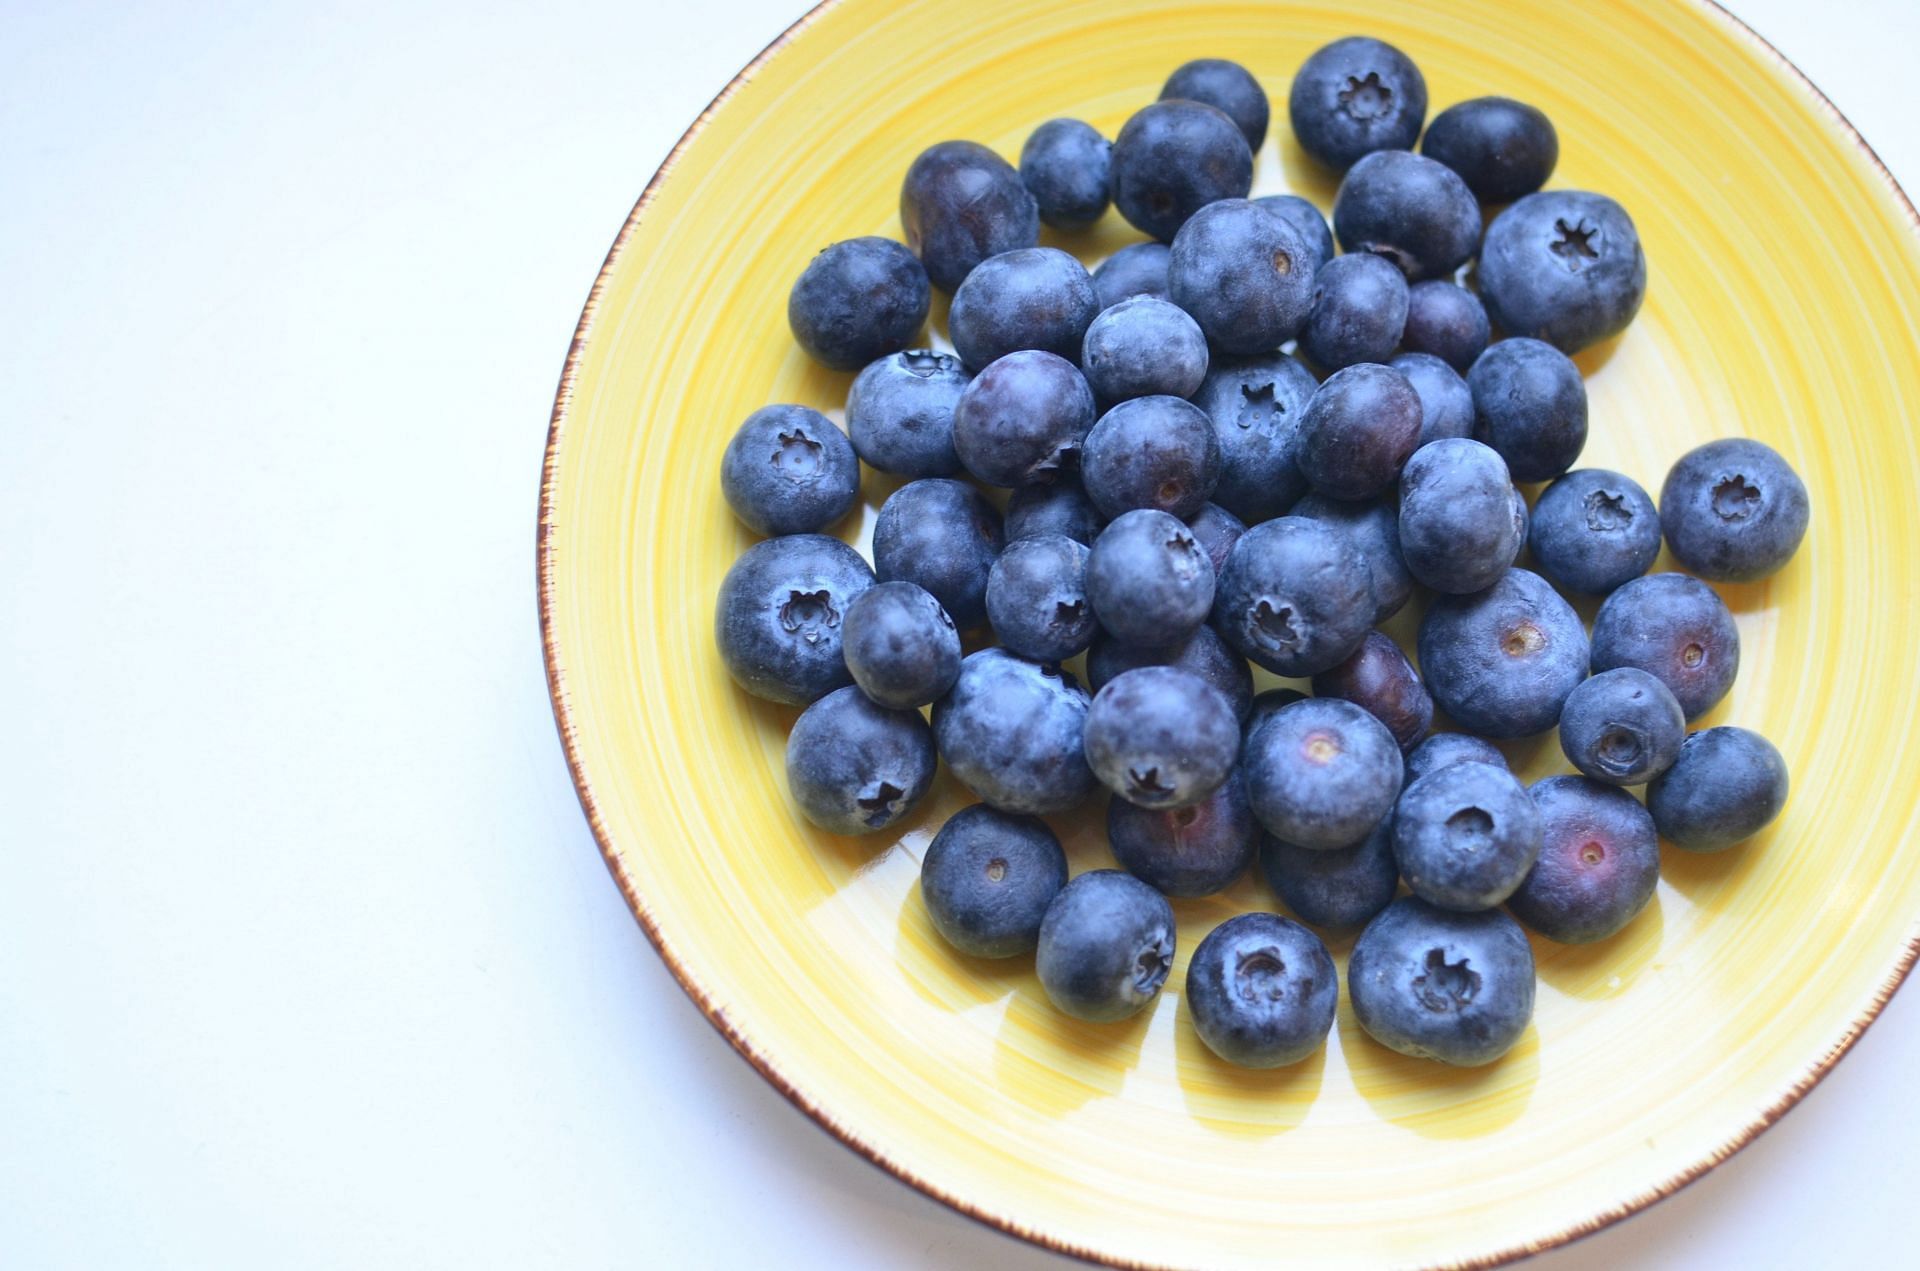 Blueberry juice is made out of blueberries and is a nutrient-rich healthy drink (Image via Pexels @Skylar Kang)